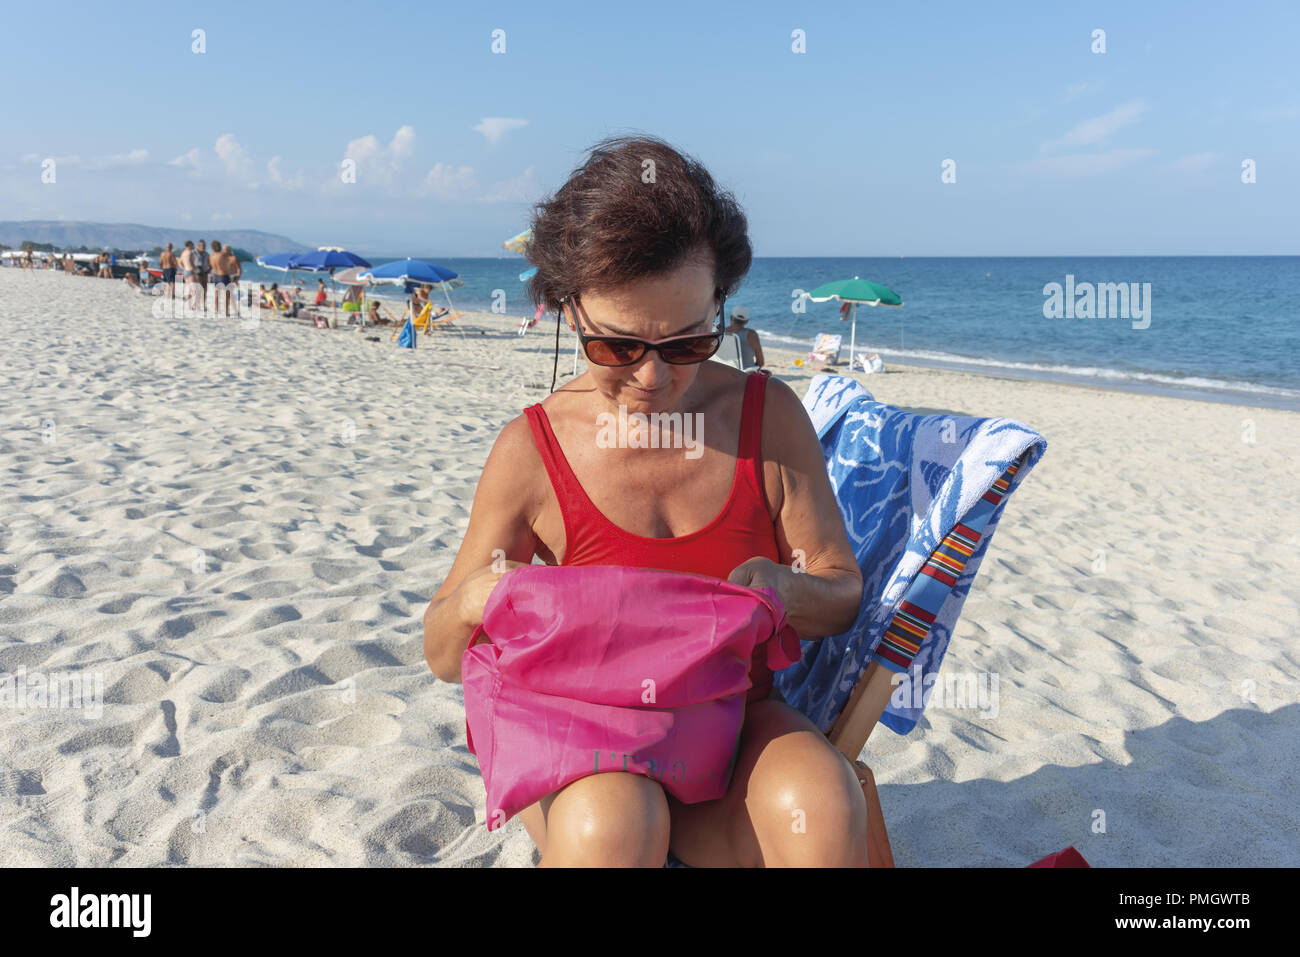 Italy Calabria Middle-aged woman at the sea sitting on a tanning bed 8 Stock Photo